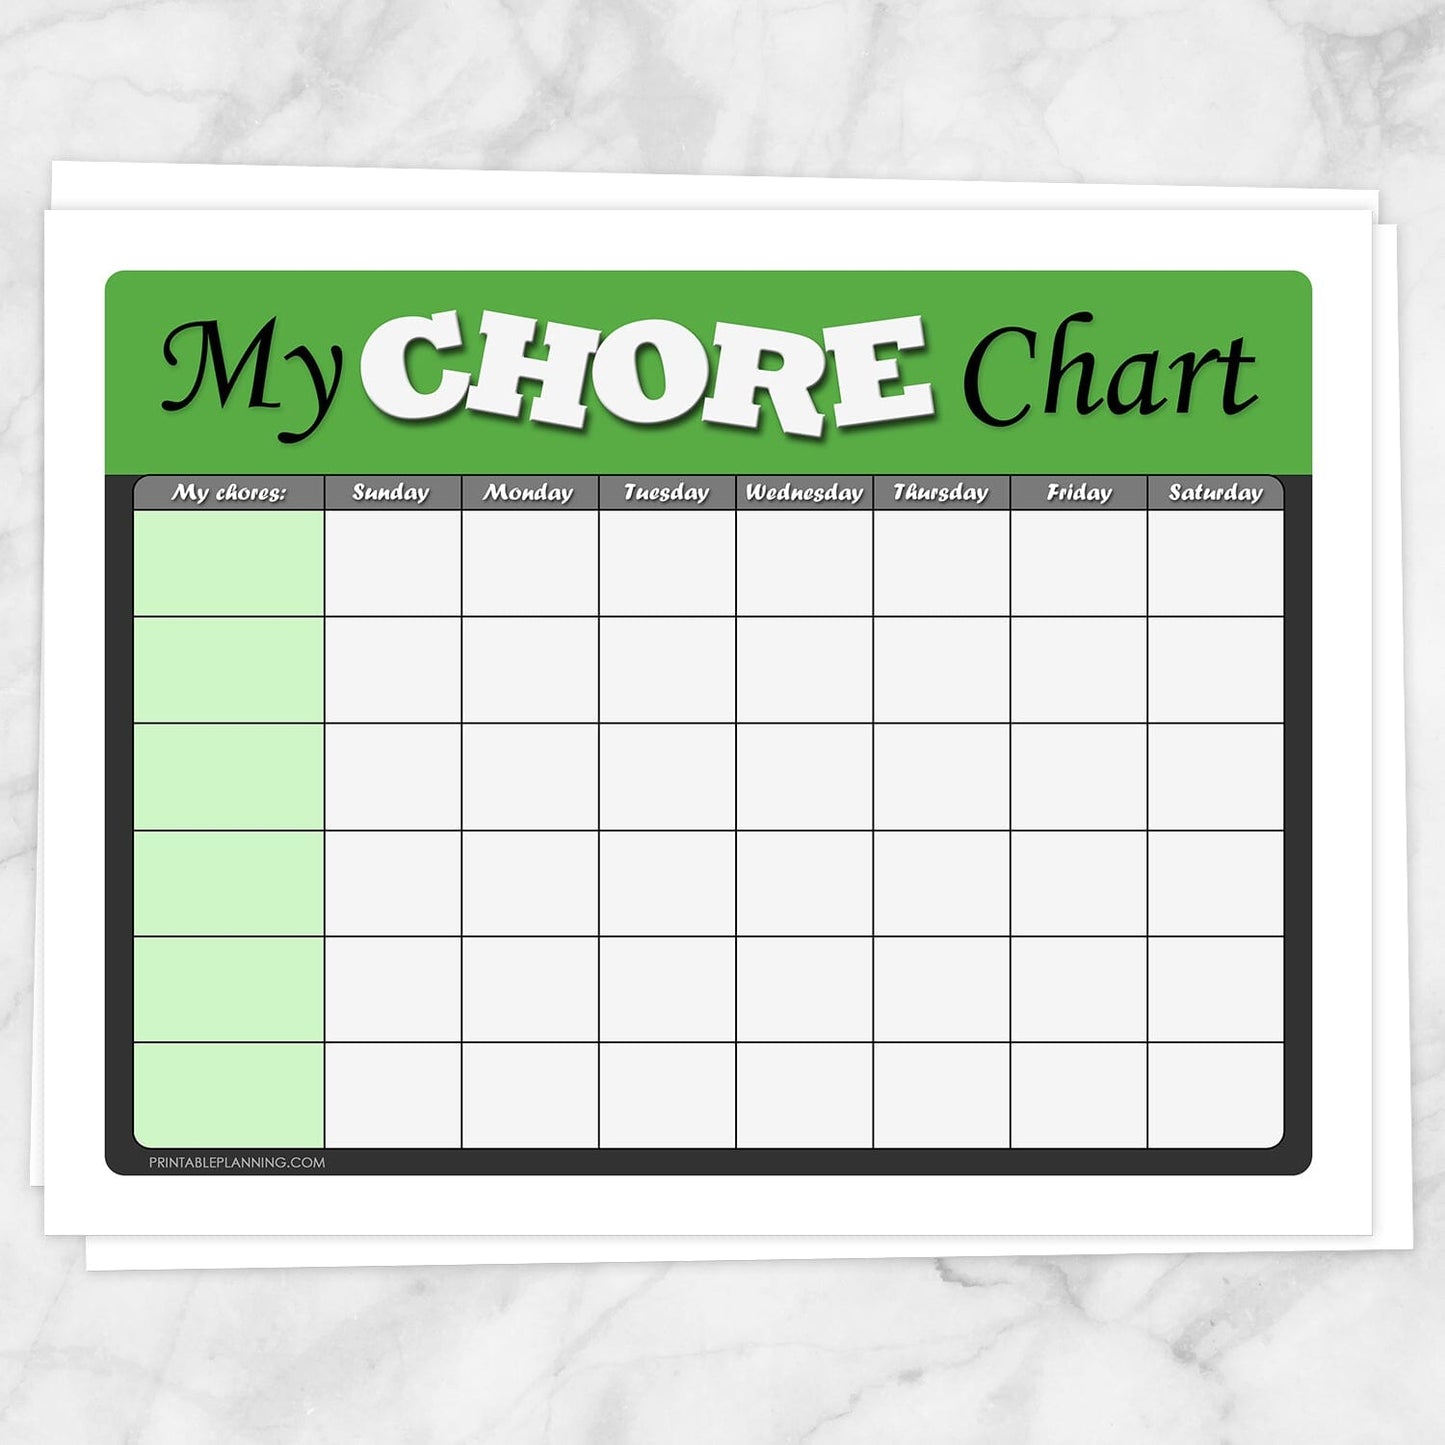 Printable Kids Chore Chart - 'My Chore Chart' Weekly Page in green at Printable Planning.